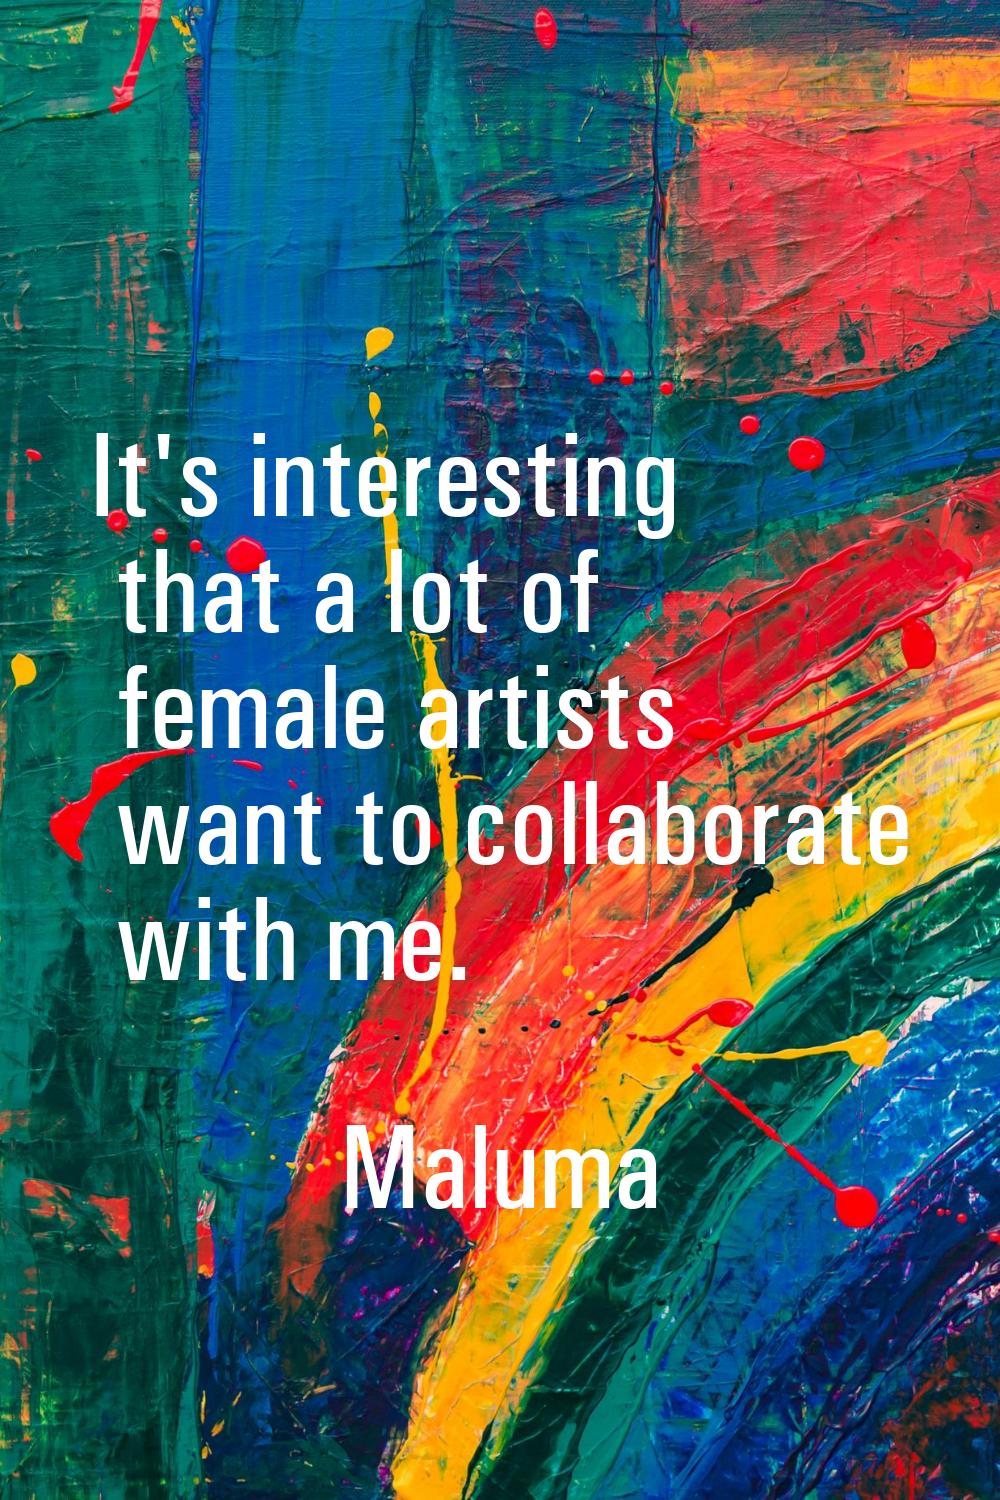 It's interesting that a lot of female artists want to collaborate with me.